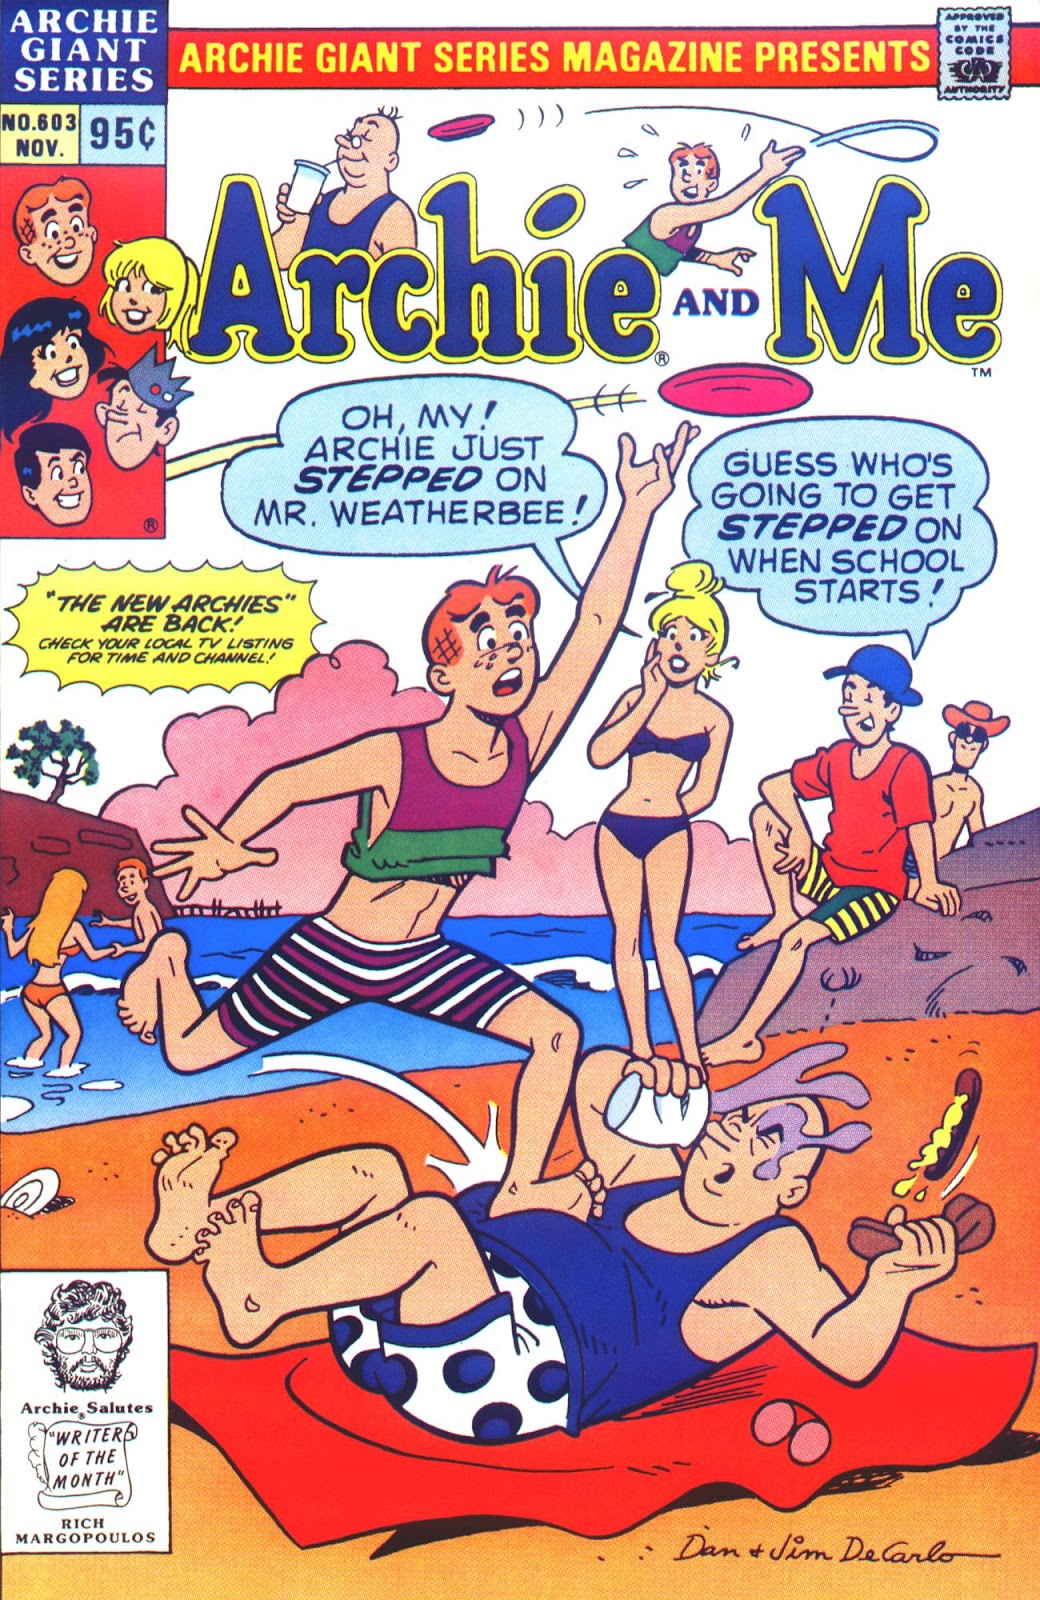 Archie Giant Series Magazine 603 Page 1